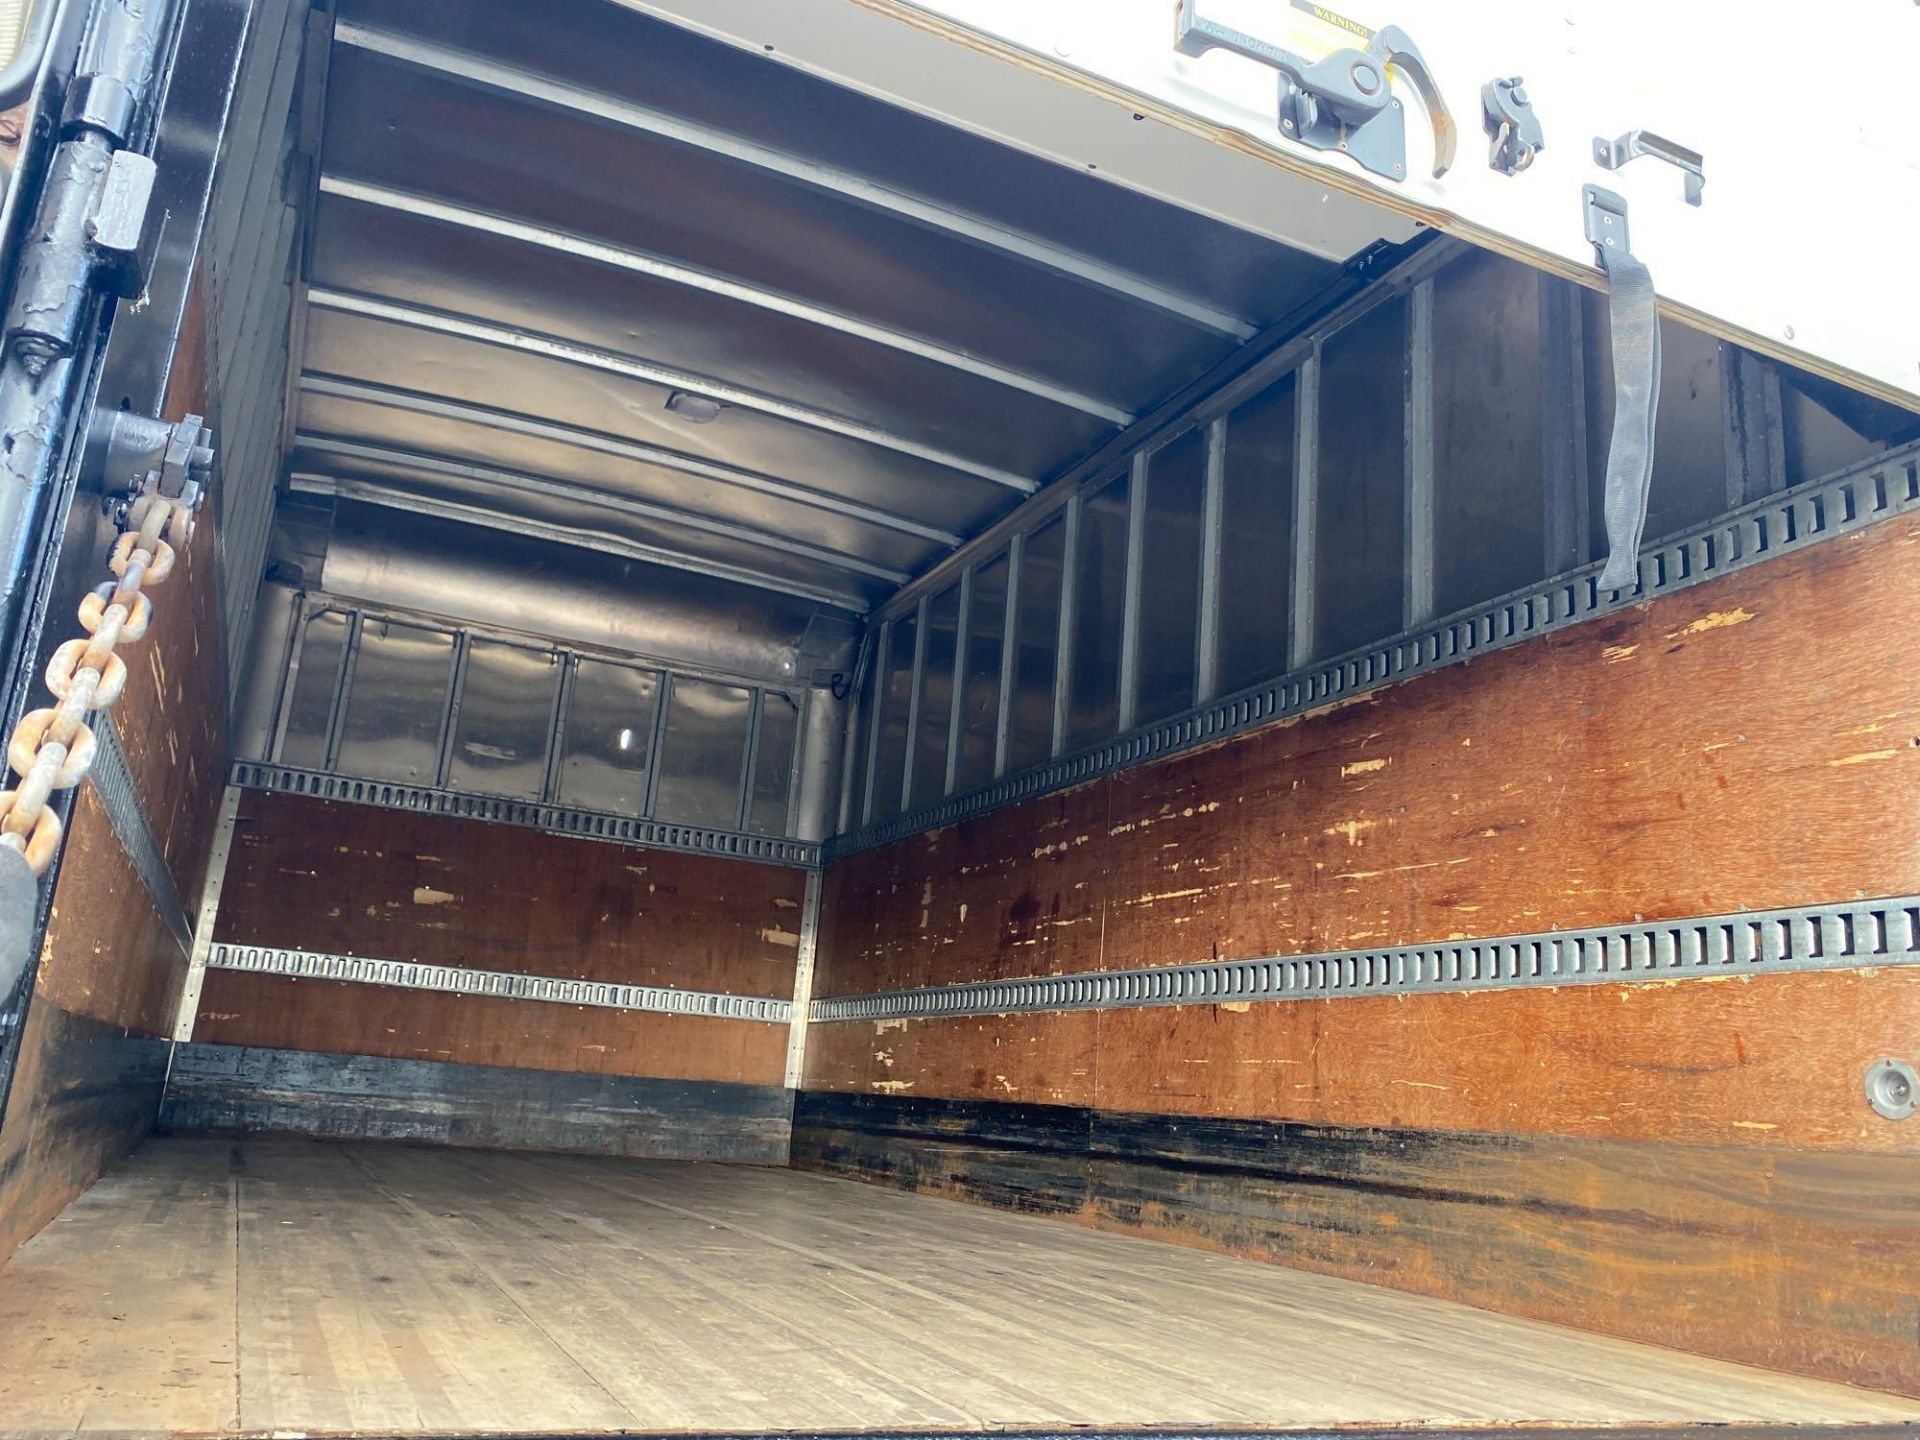 IH4300 BOX TRUCK, 16' X 8' BED, 4,000 LB CAPACITY LIFT GATE, NEWER ROLL UP BACK DOOR - Image 22 of 24